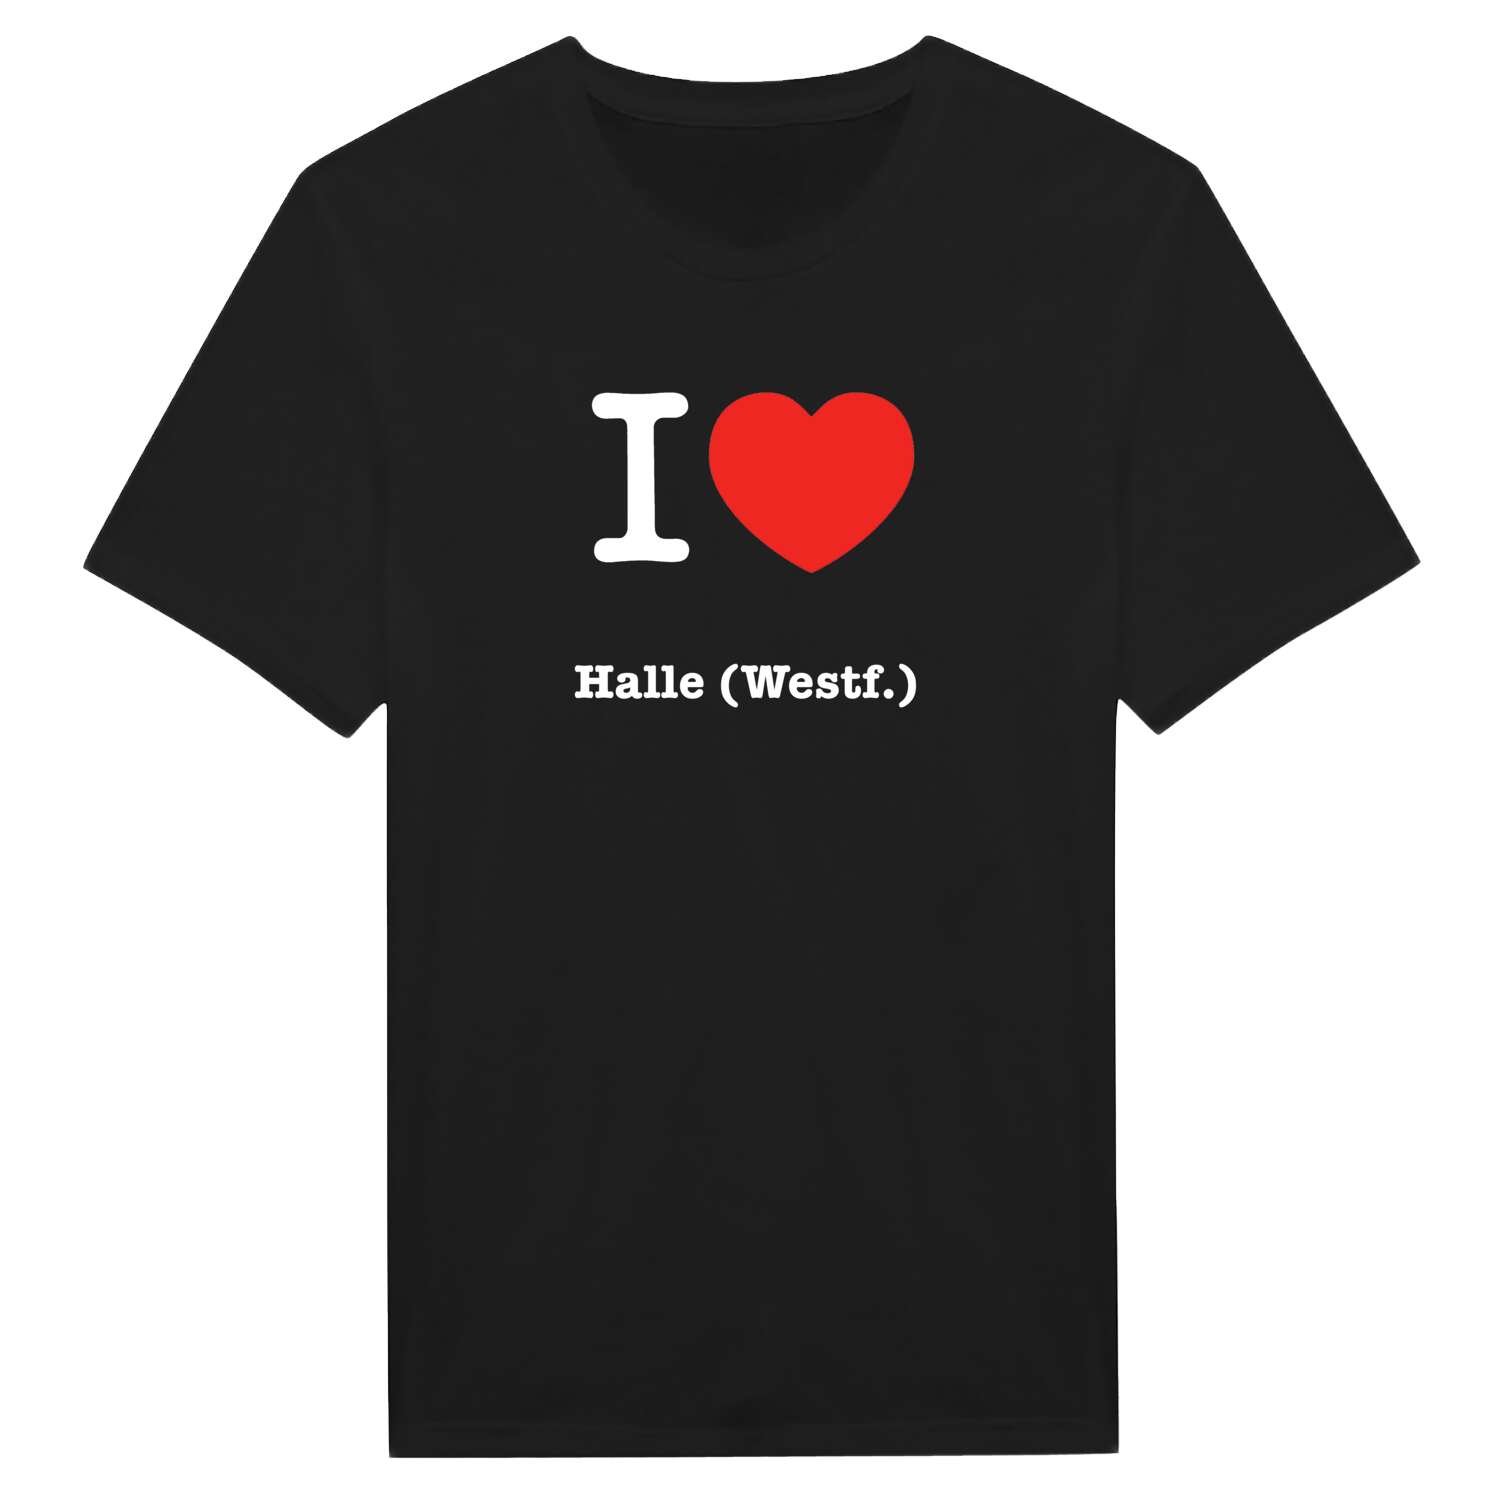 Halle (Westf.) T-Shirt »I love«